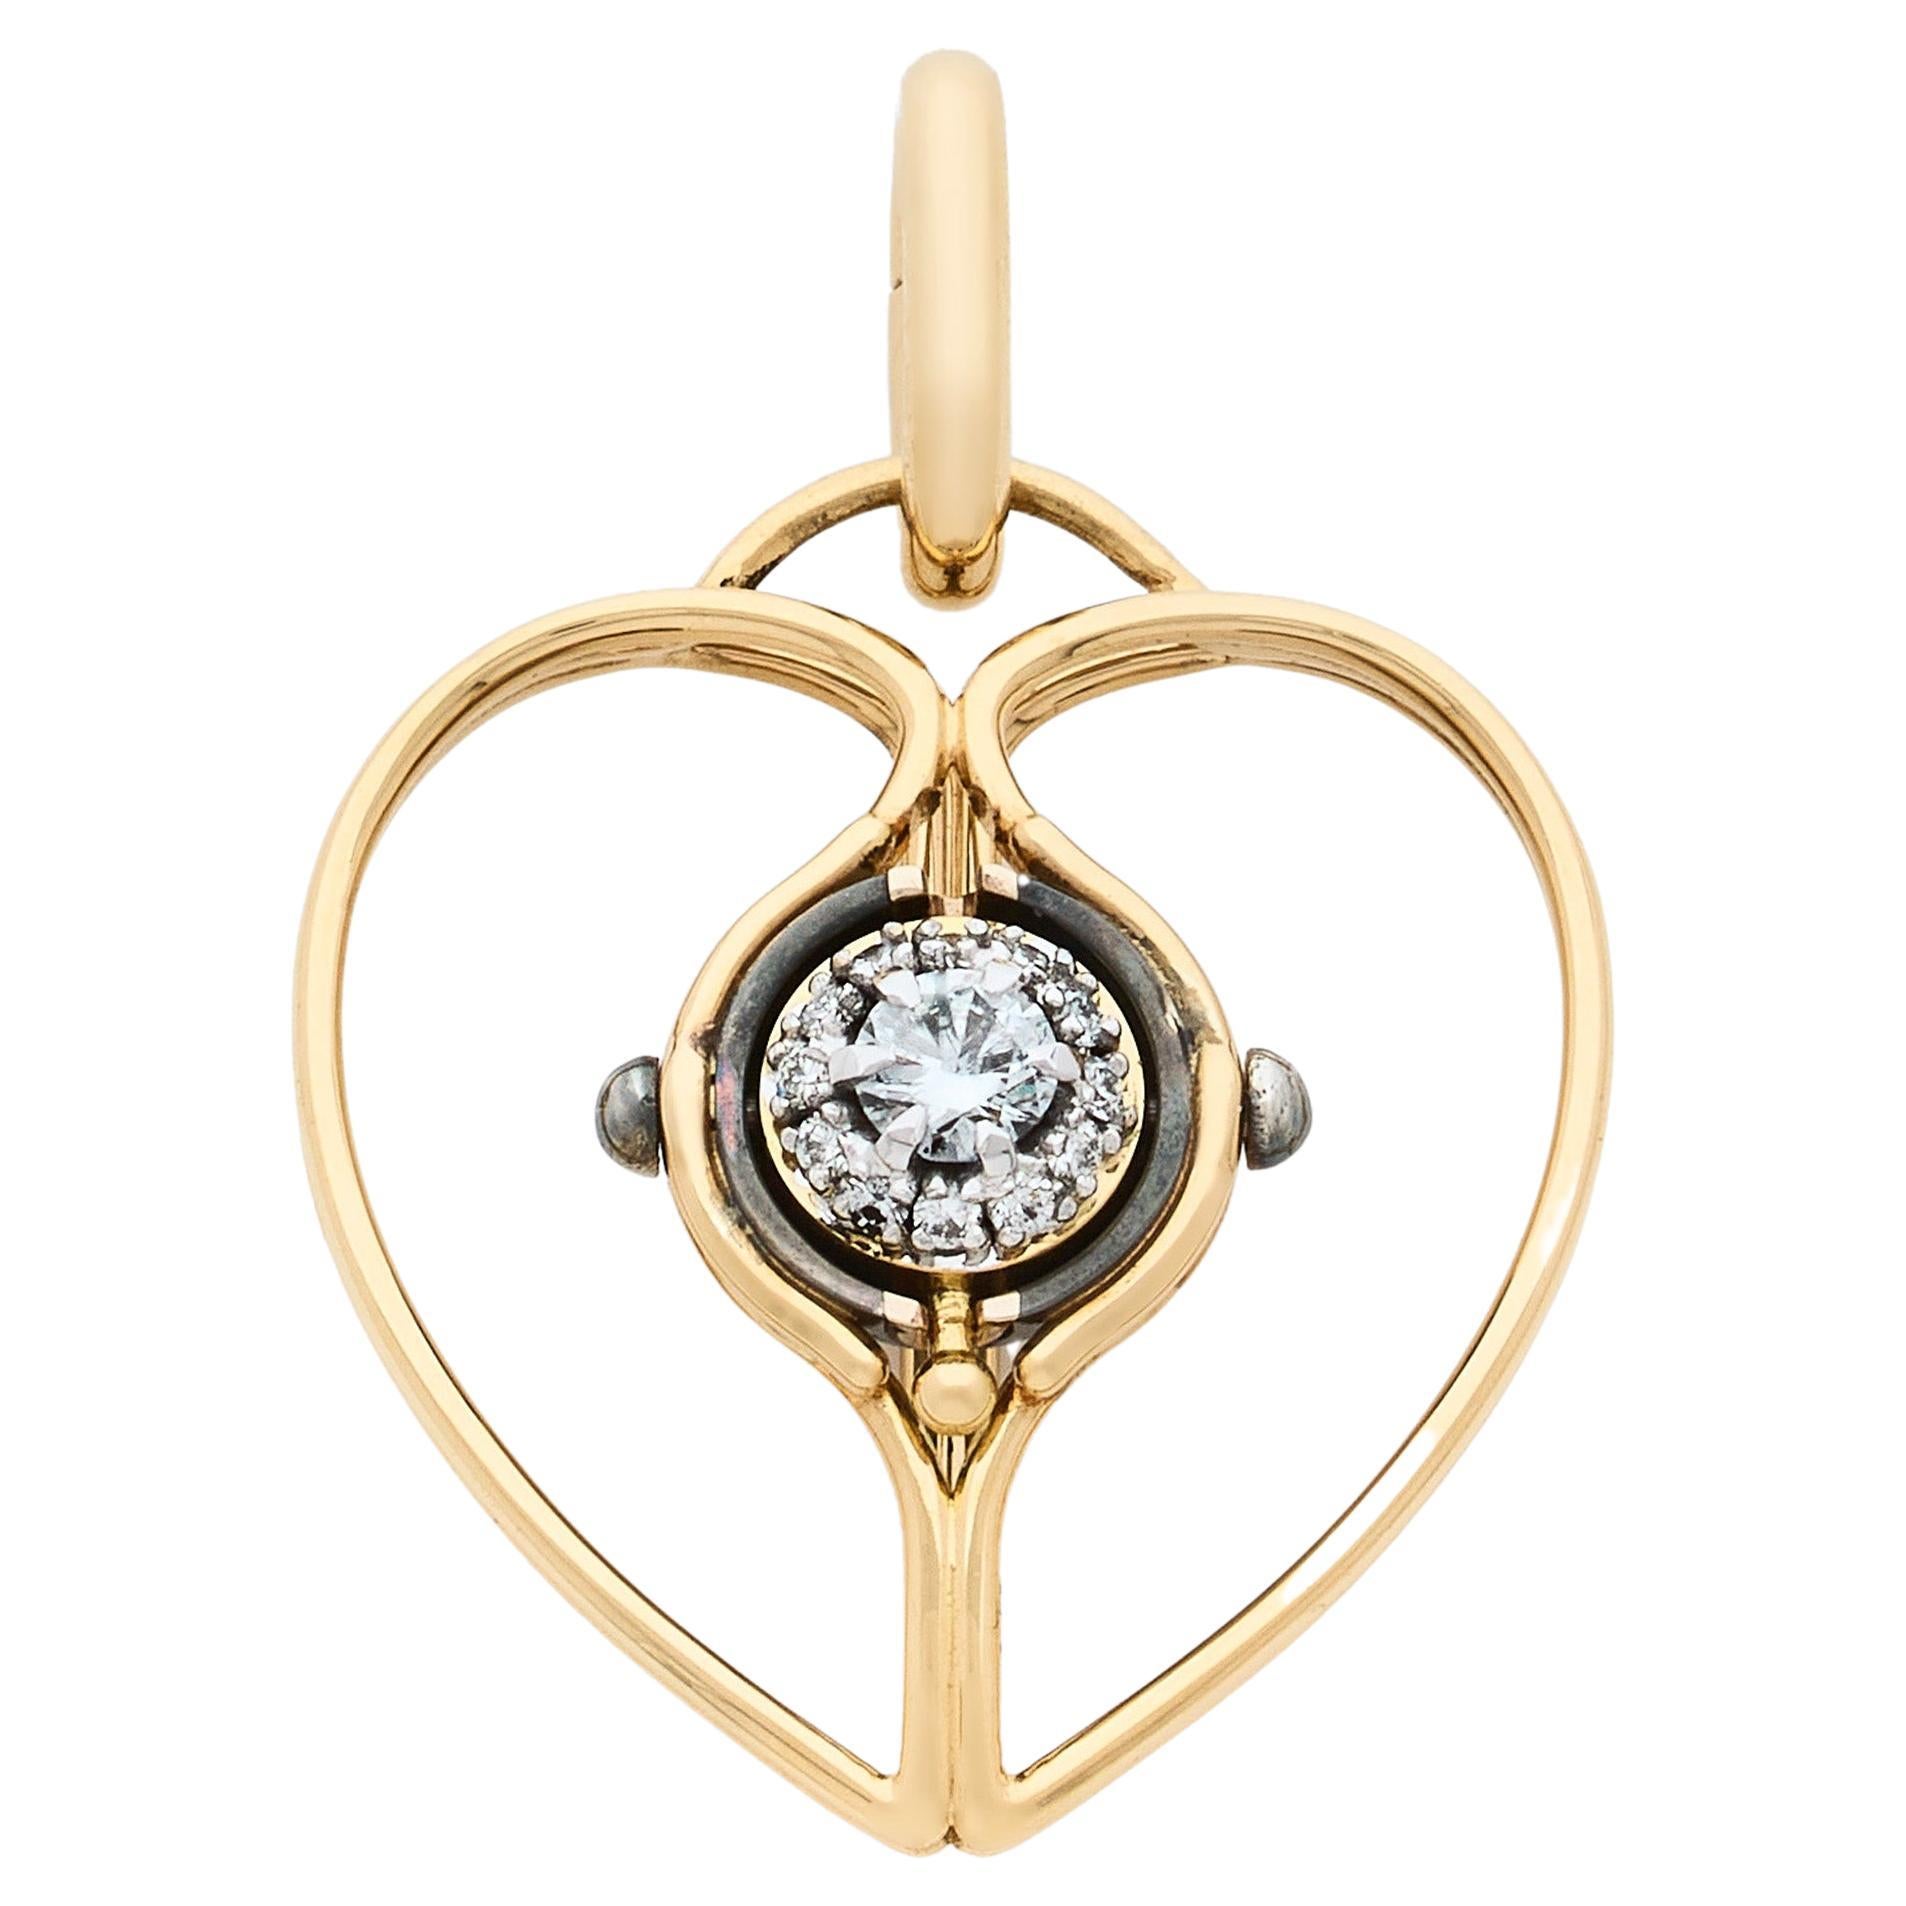 Mira Diamond Heart Charm in 18k Yellow Gold by Elie Top